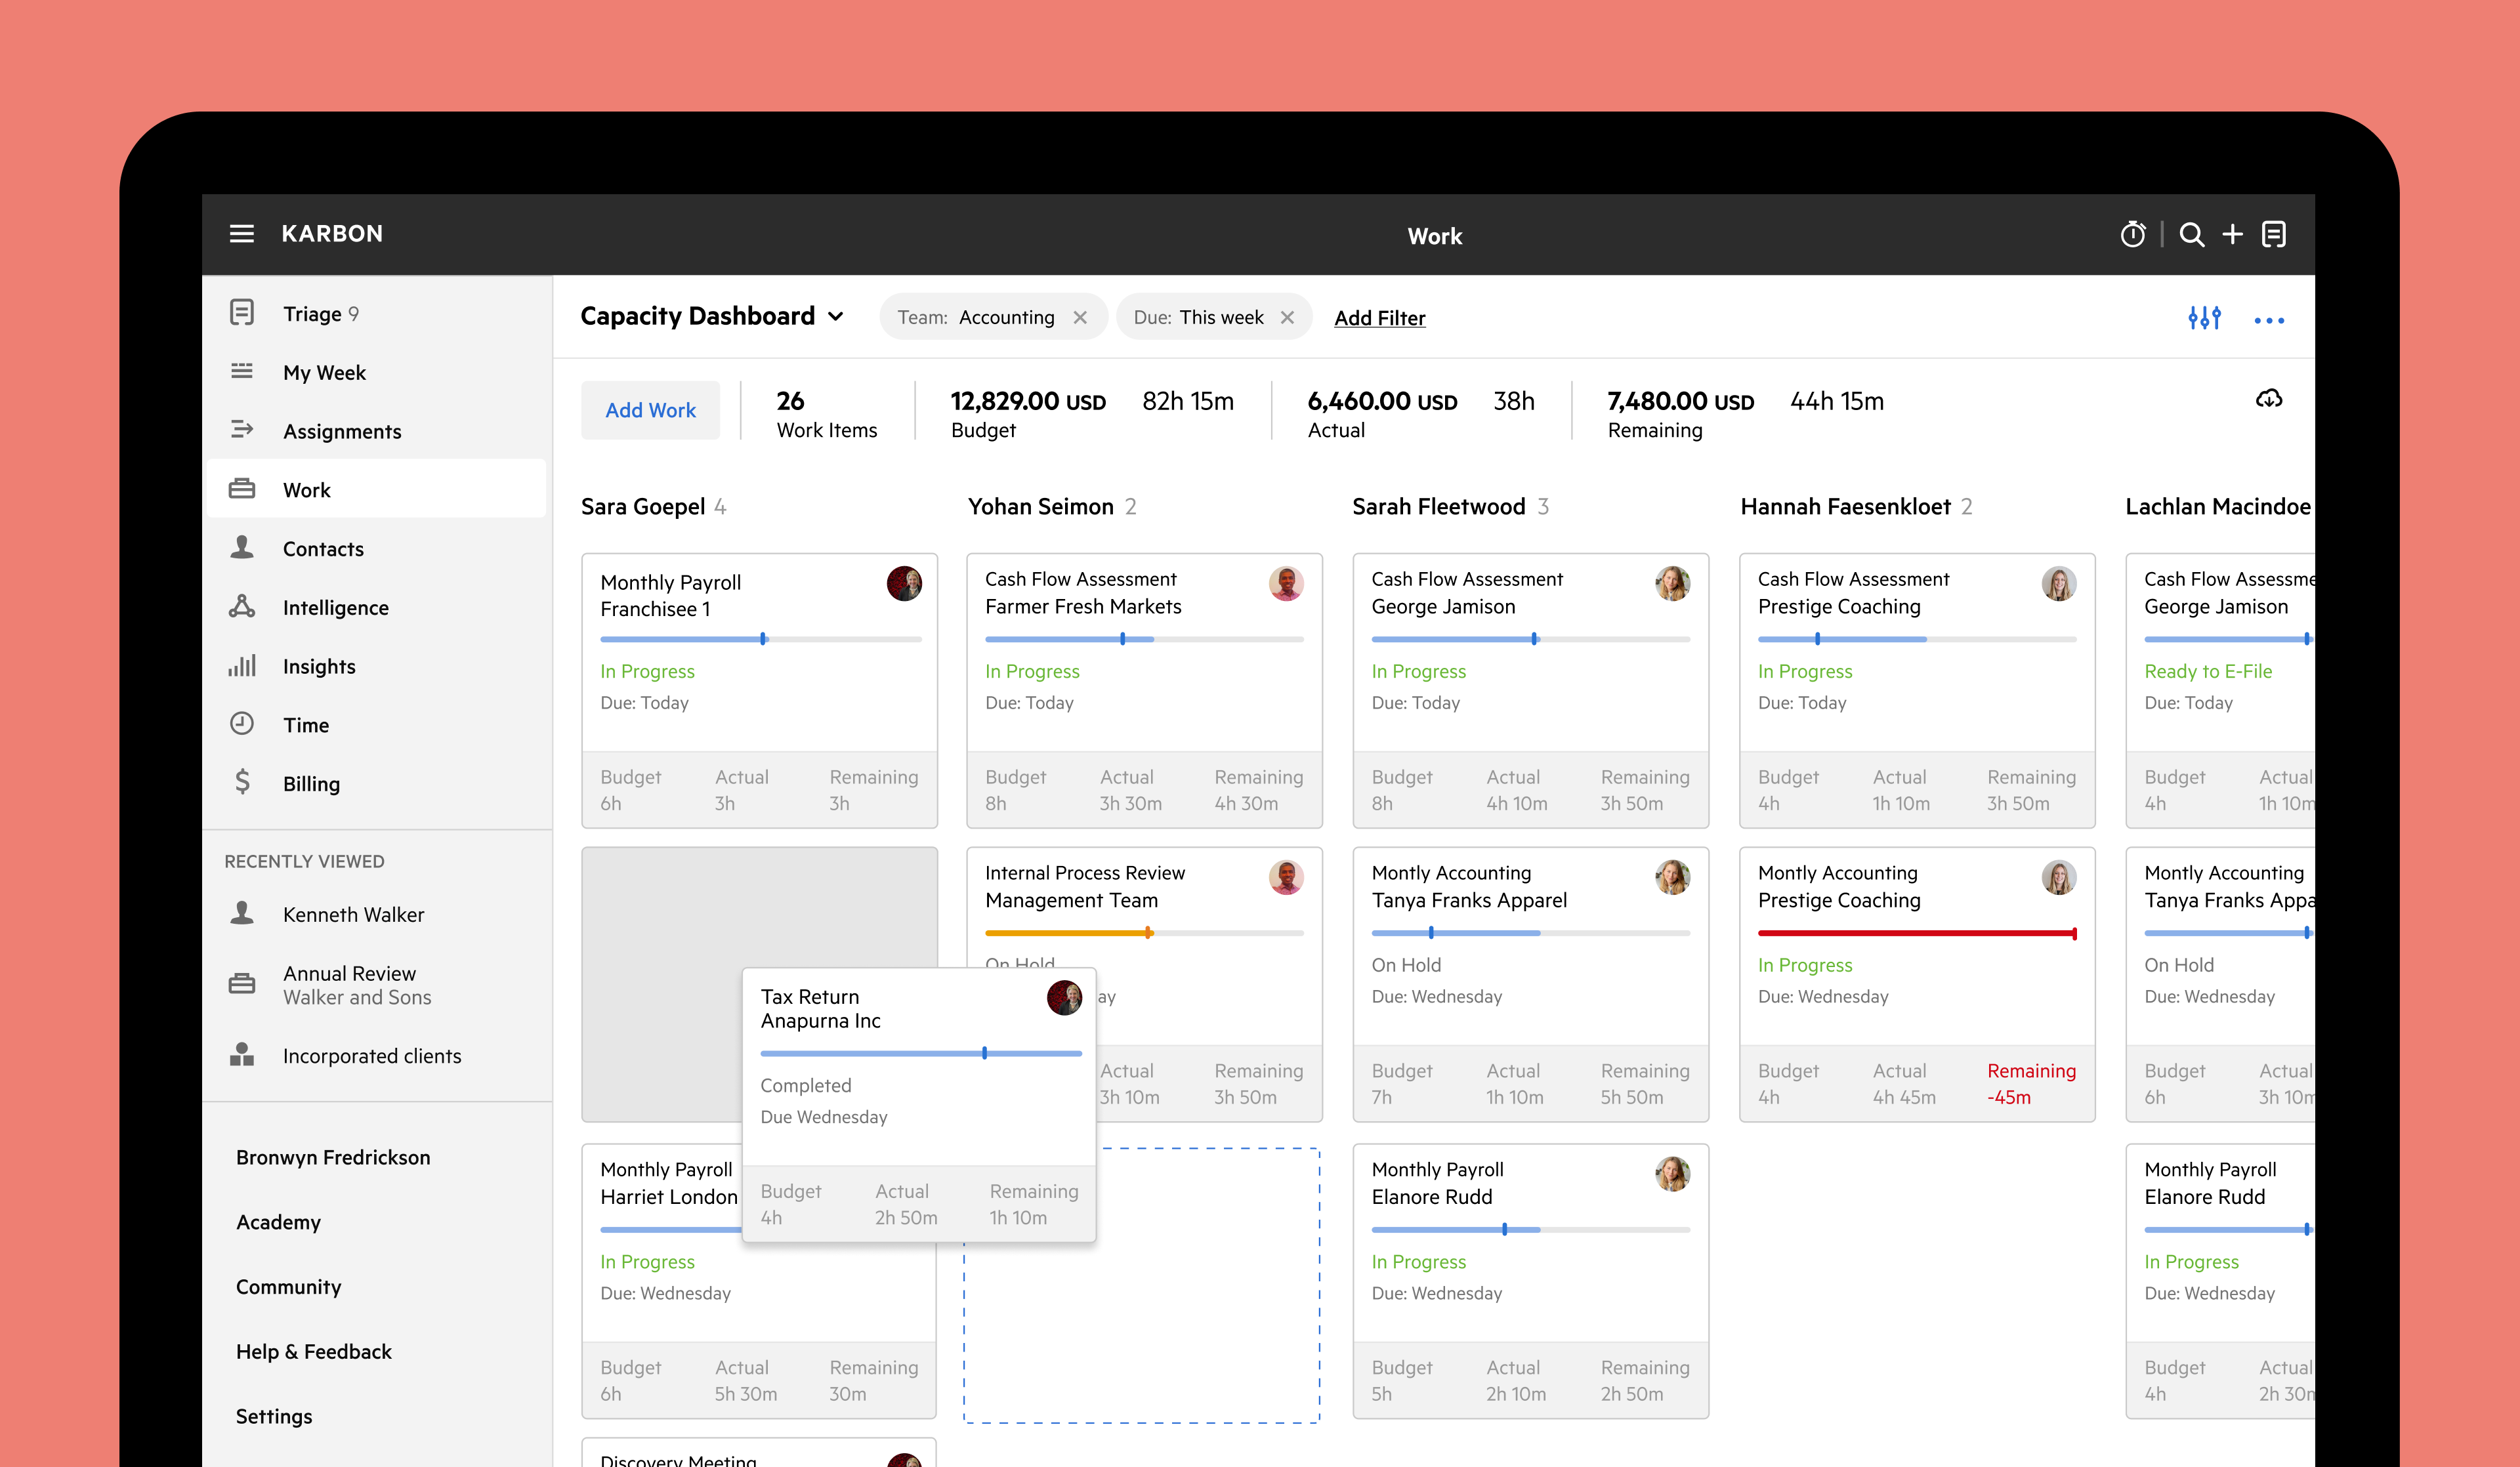 A capacity dashboard view in Karbon—an accounting practice management tool—using the Kanban view functionality.